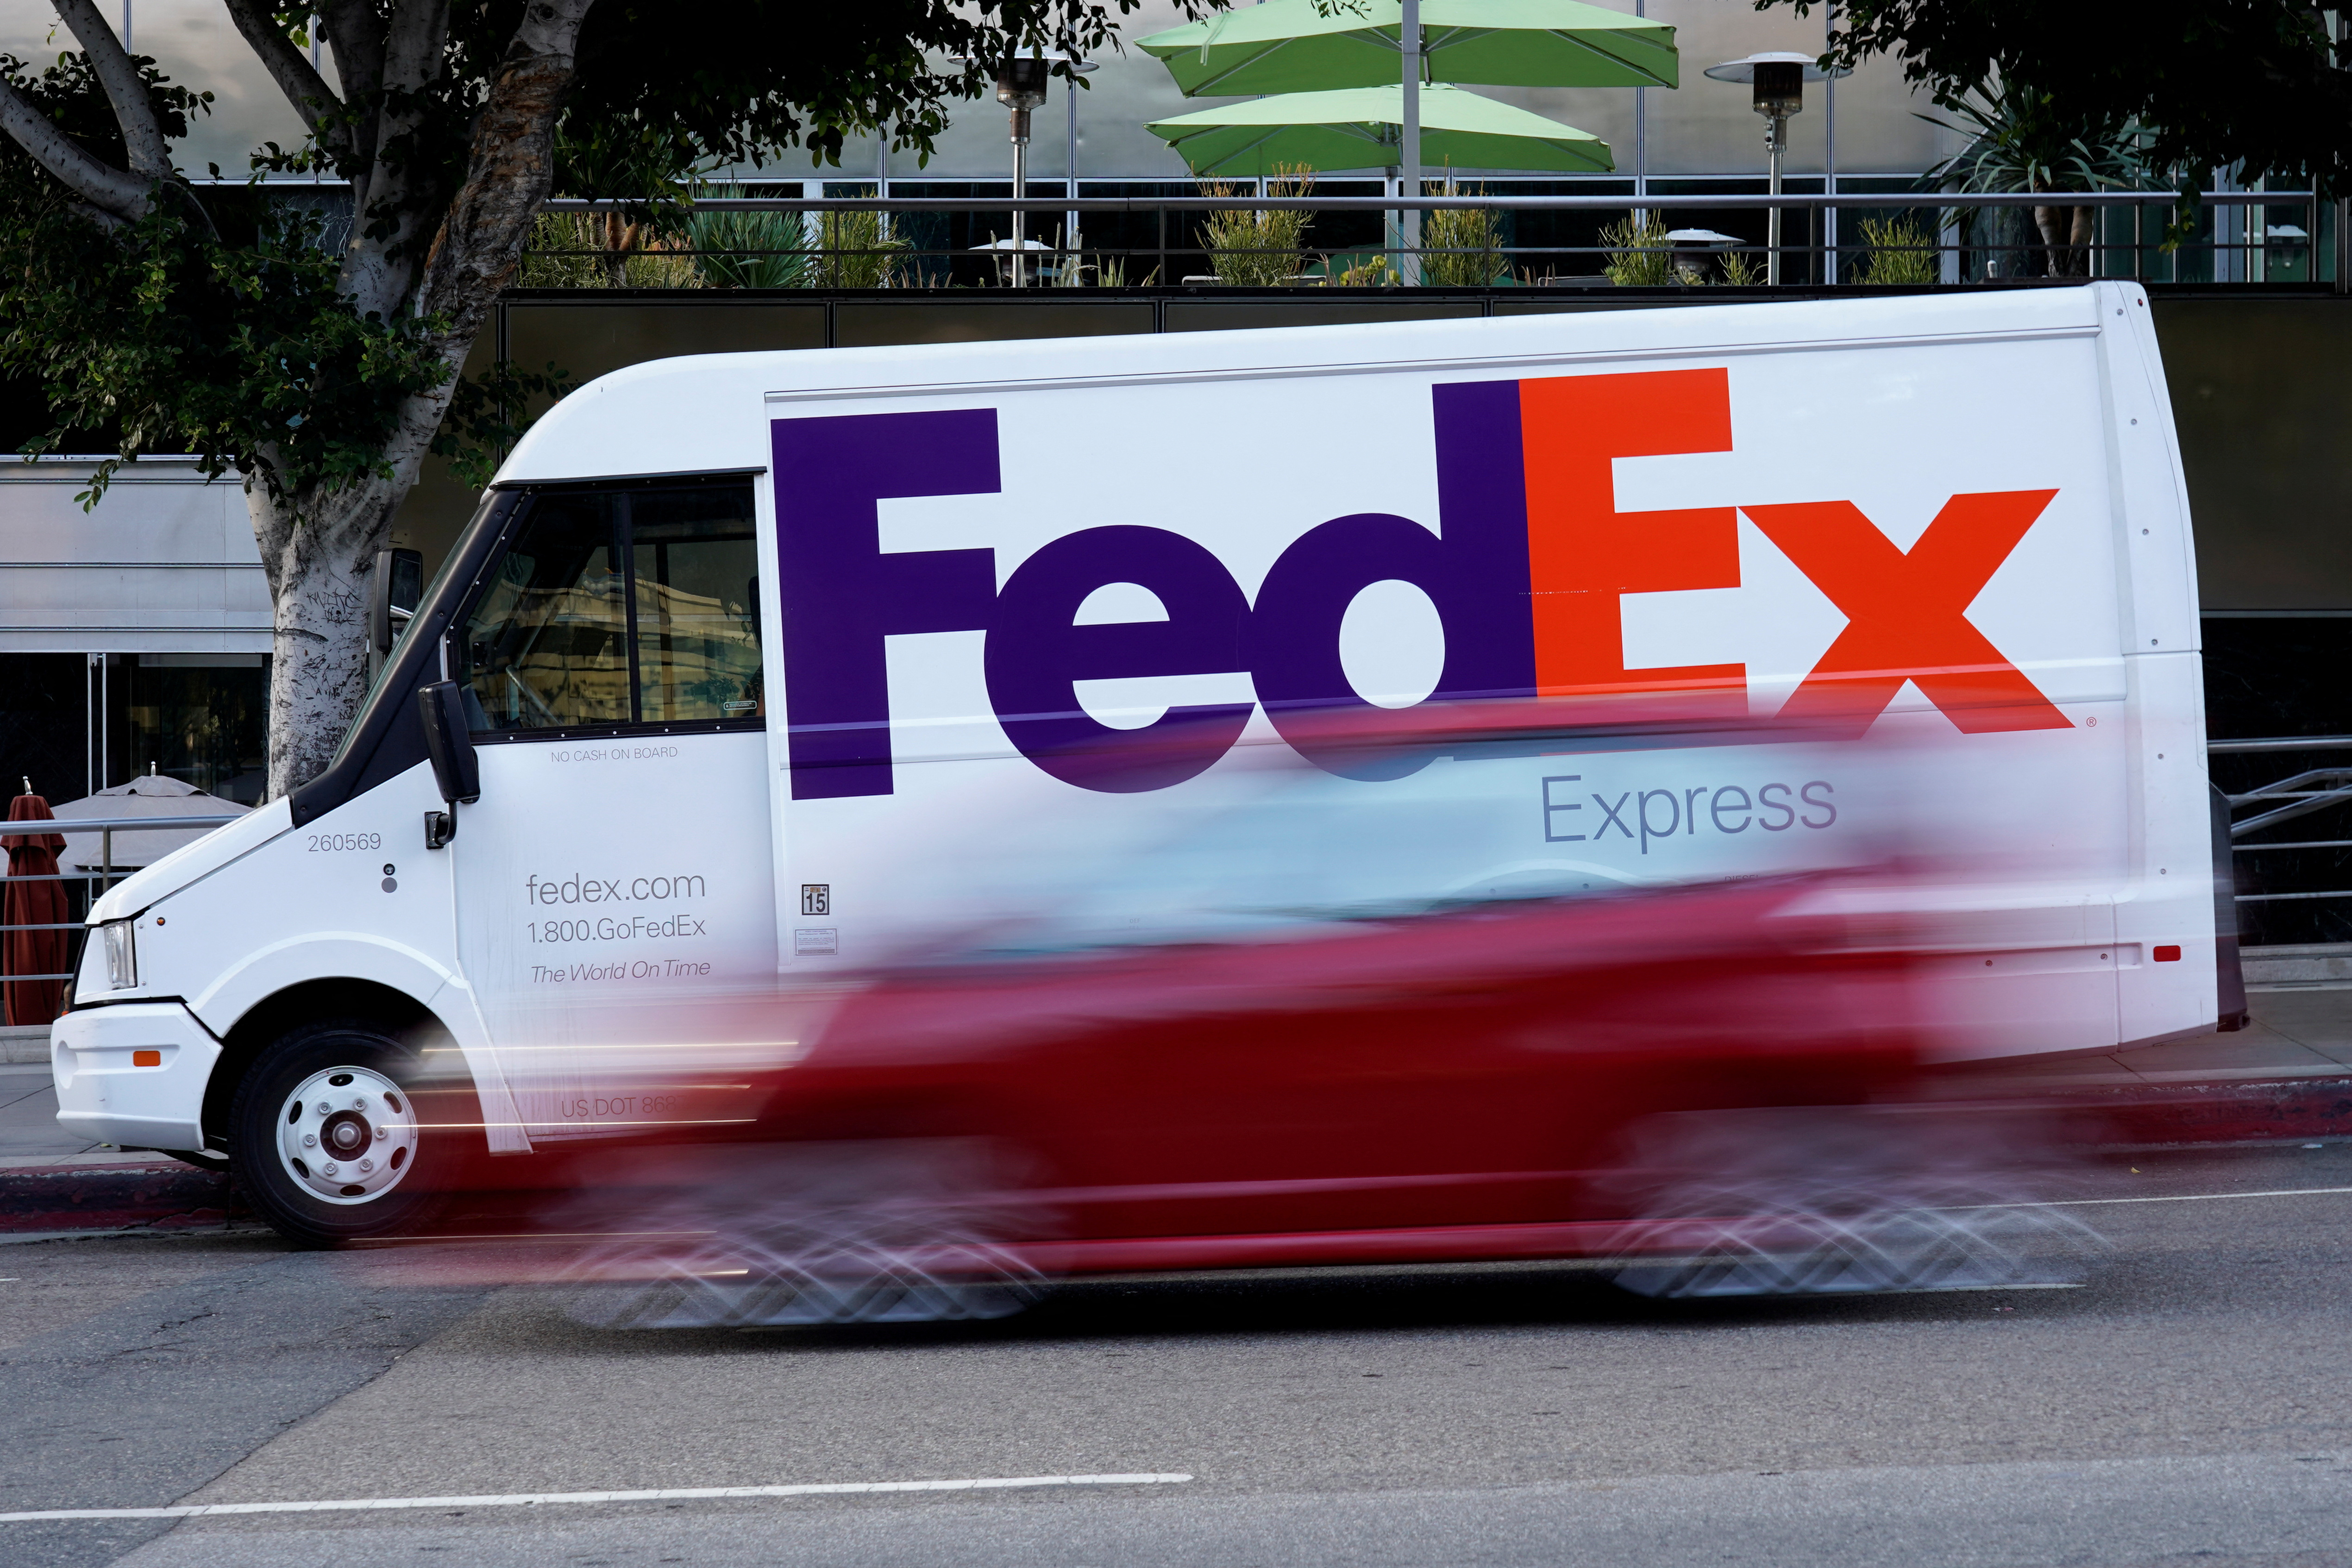 A Federal Express truck is shown in Los Angeles, California